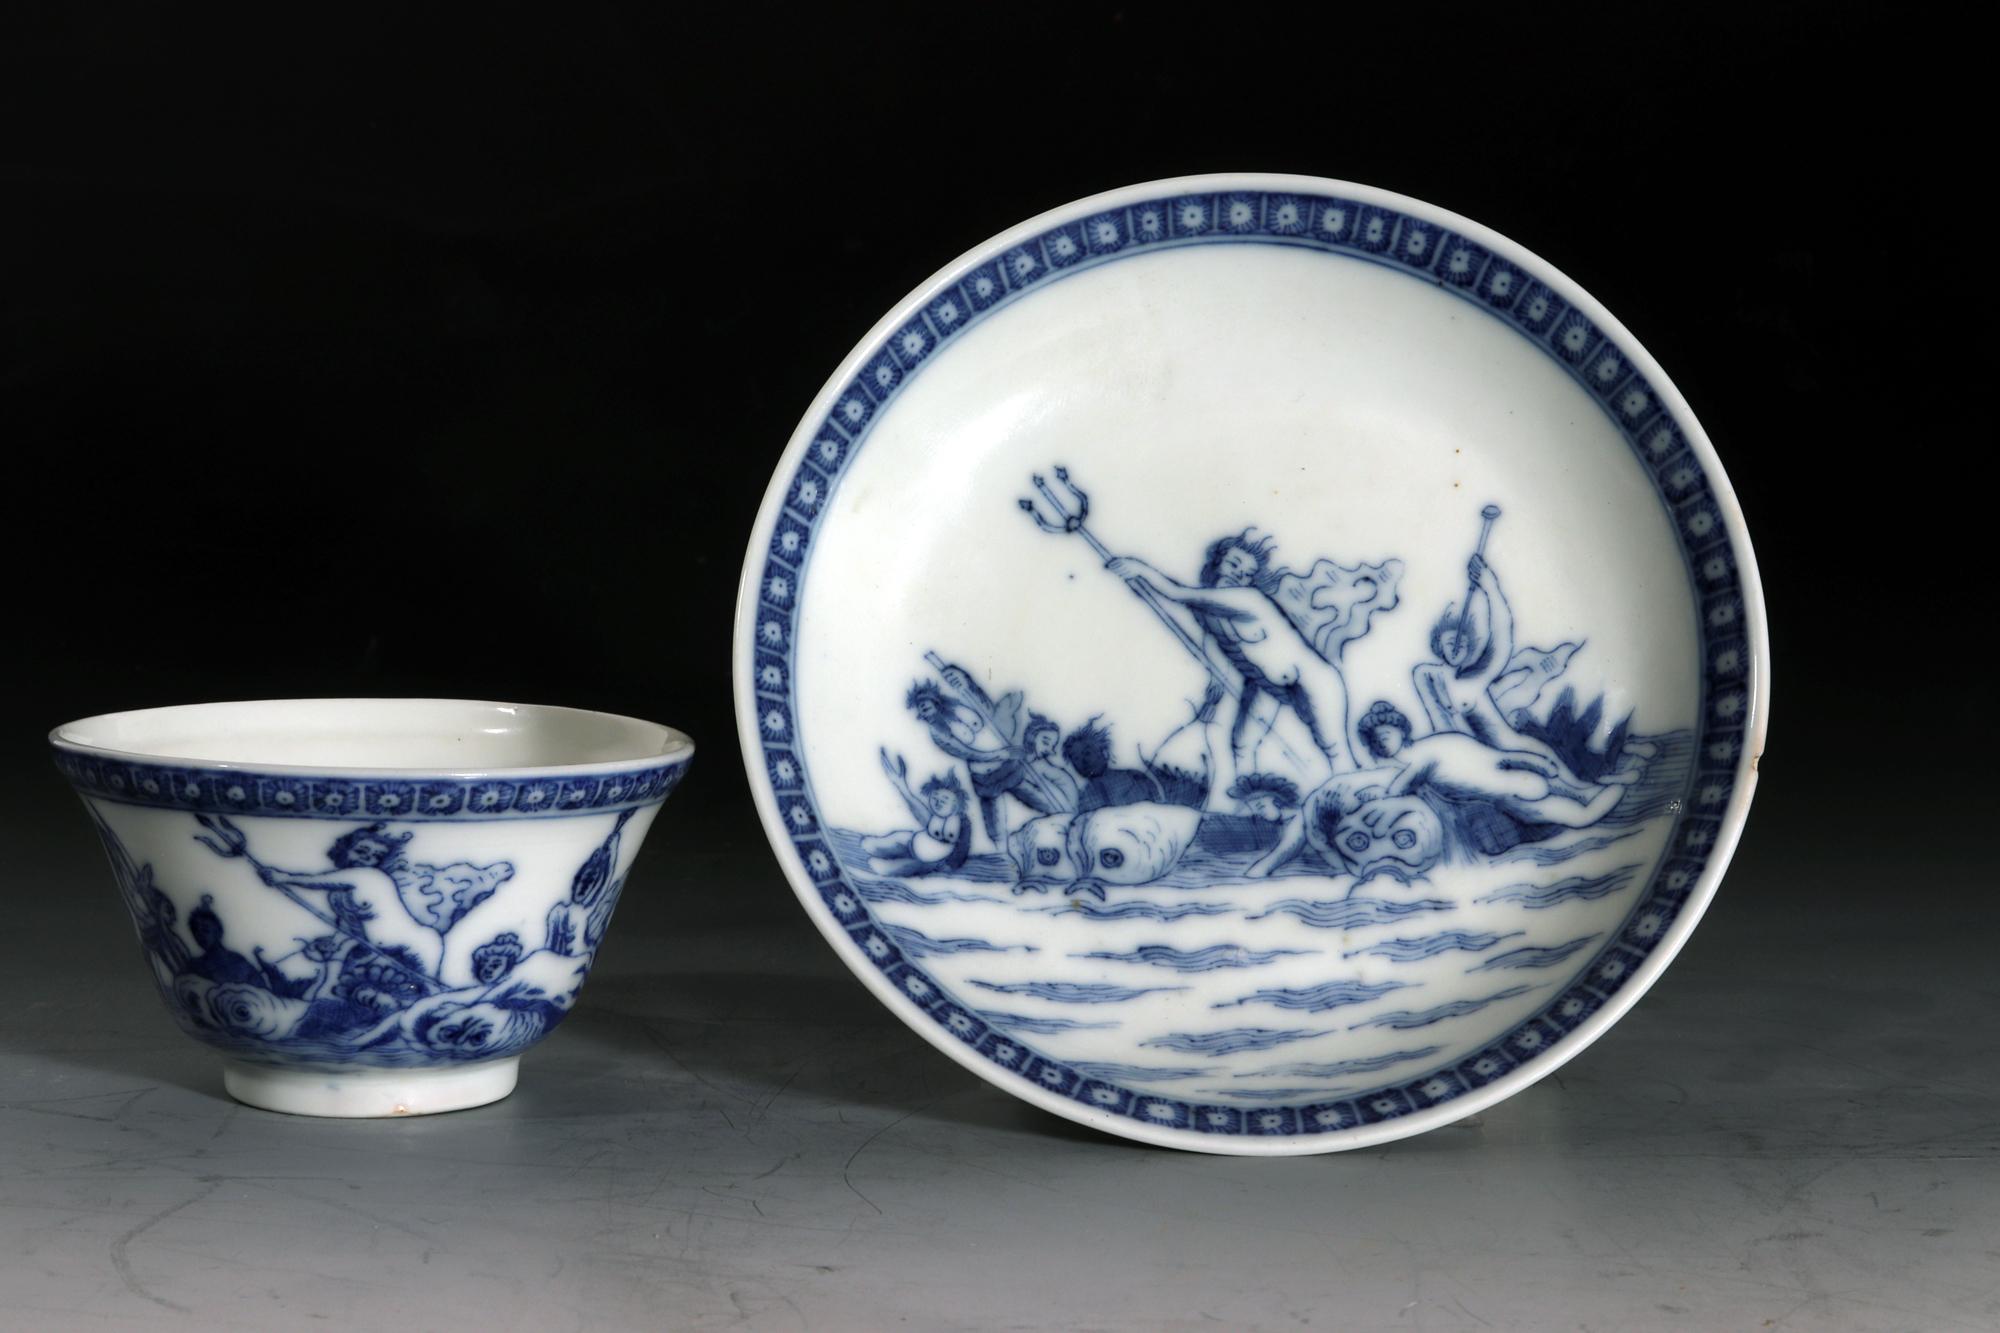 Chinese Export Porcelain European-subject Blue & White Tea Bowl and Saucer,
Neptune, The God of The Sea,
Dutch market,
Yongzheng Period,
Circa 1730-35

The Chinese Export porcelain, probably made for the Dutch market, depicts Neptune, the God